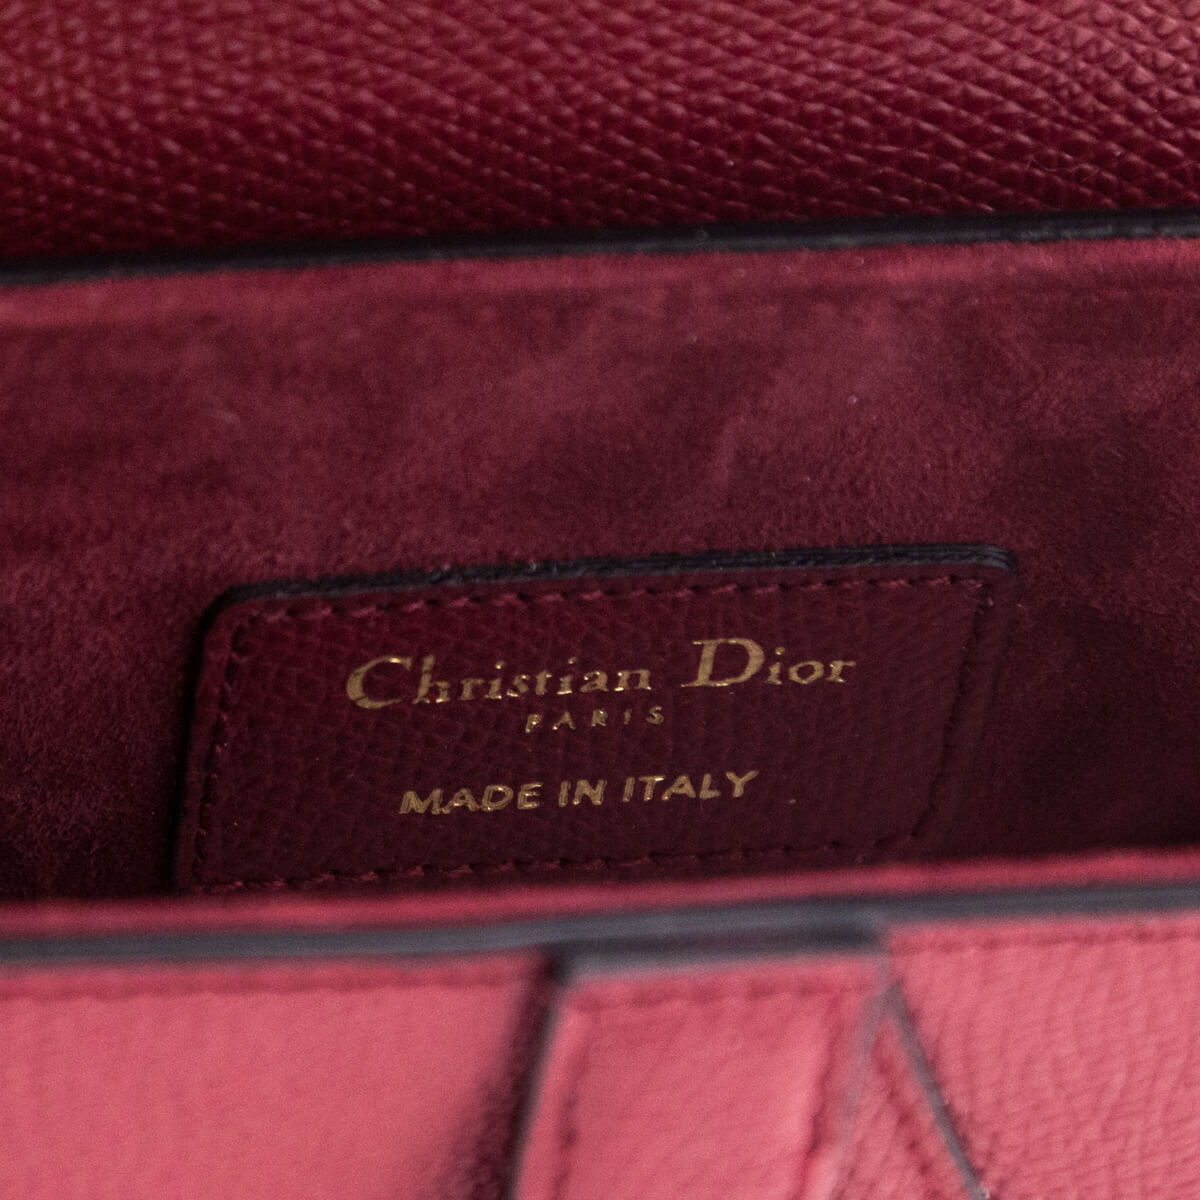 Dior Red Grained Calfskin Mini Saddle Bag - Love that Bag etc - Preowned Authentic Designer Handbags & Preloved Fashions